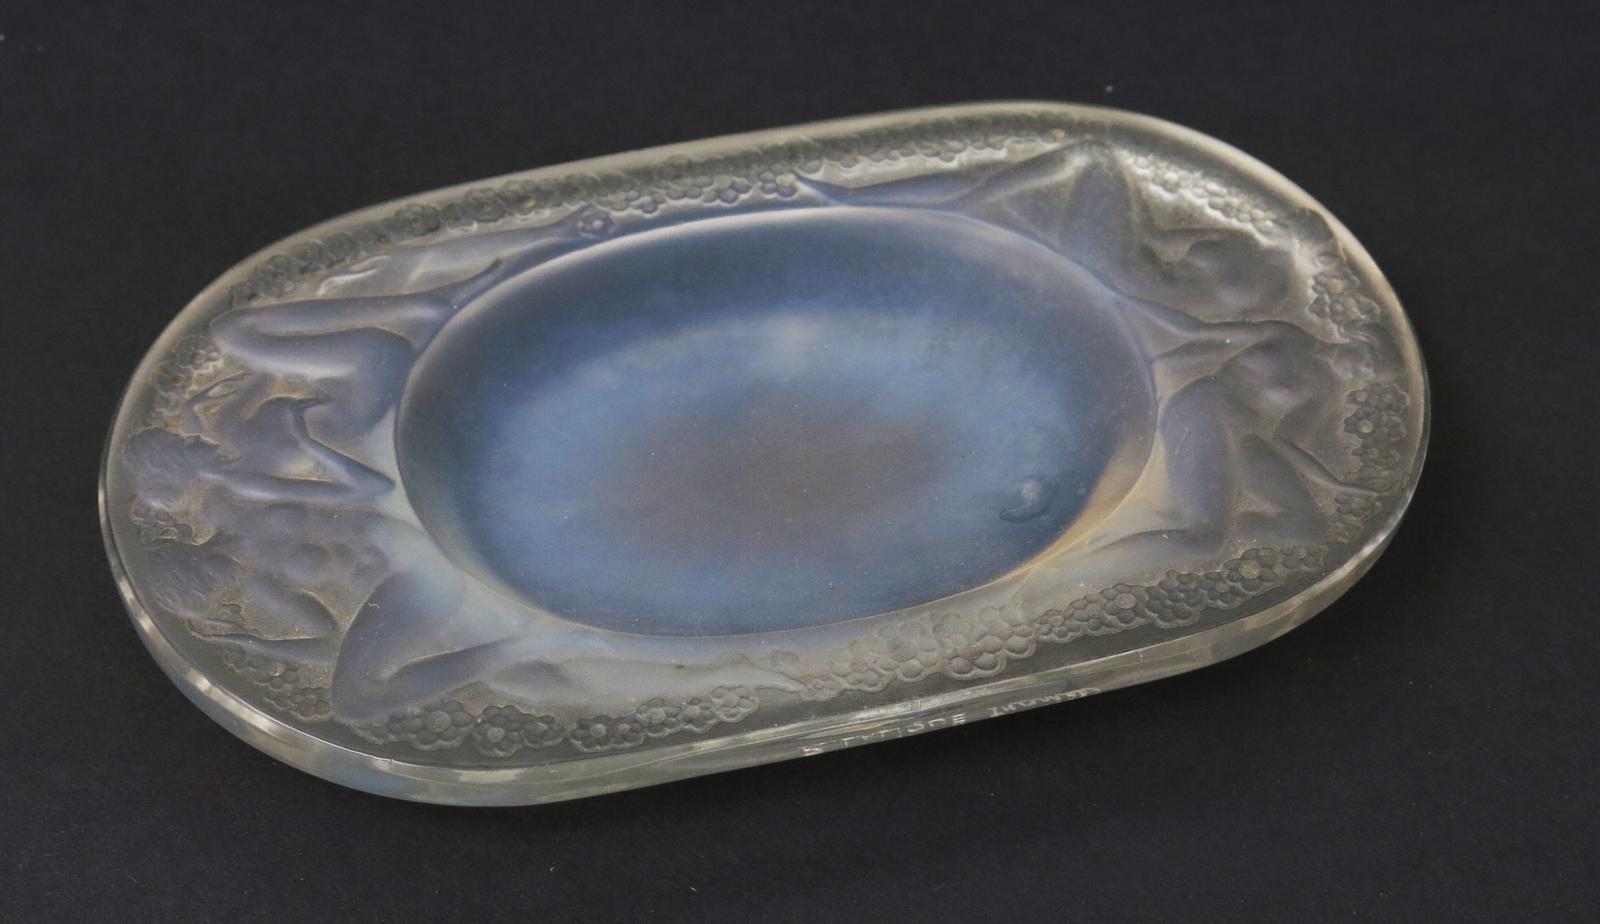 'Medicis' no.280, a Lalique opalescent glass dish designed by Rene Lalique, with remains of blue